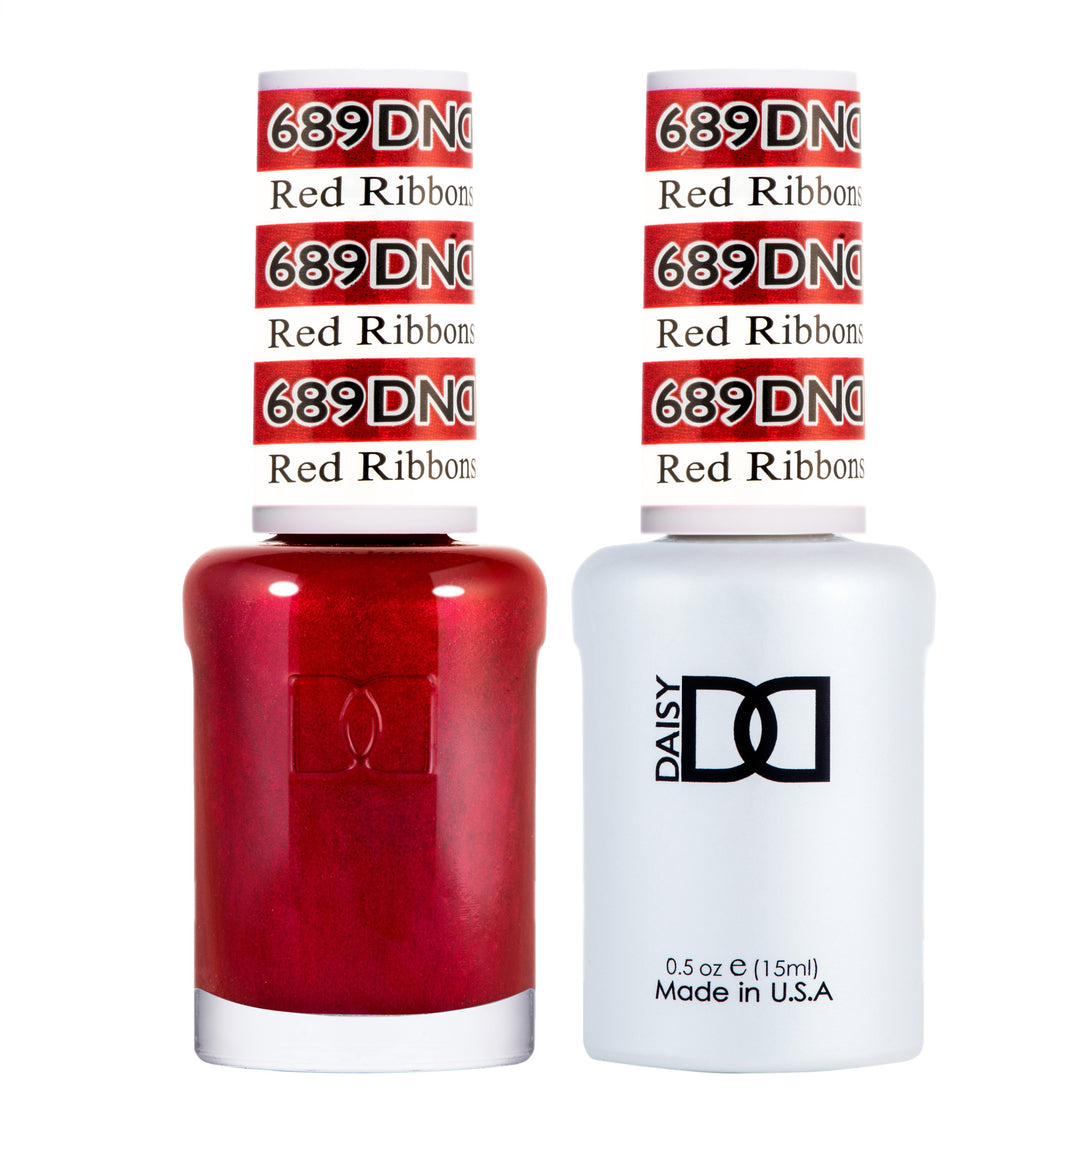 DND DUO Nail Lacquer and UV|LED Gel Polish Red Ribbons 689 (2 x 15ml)